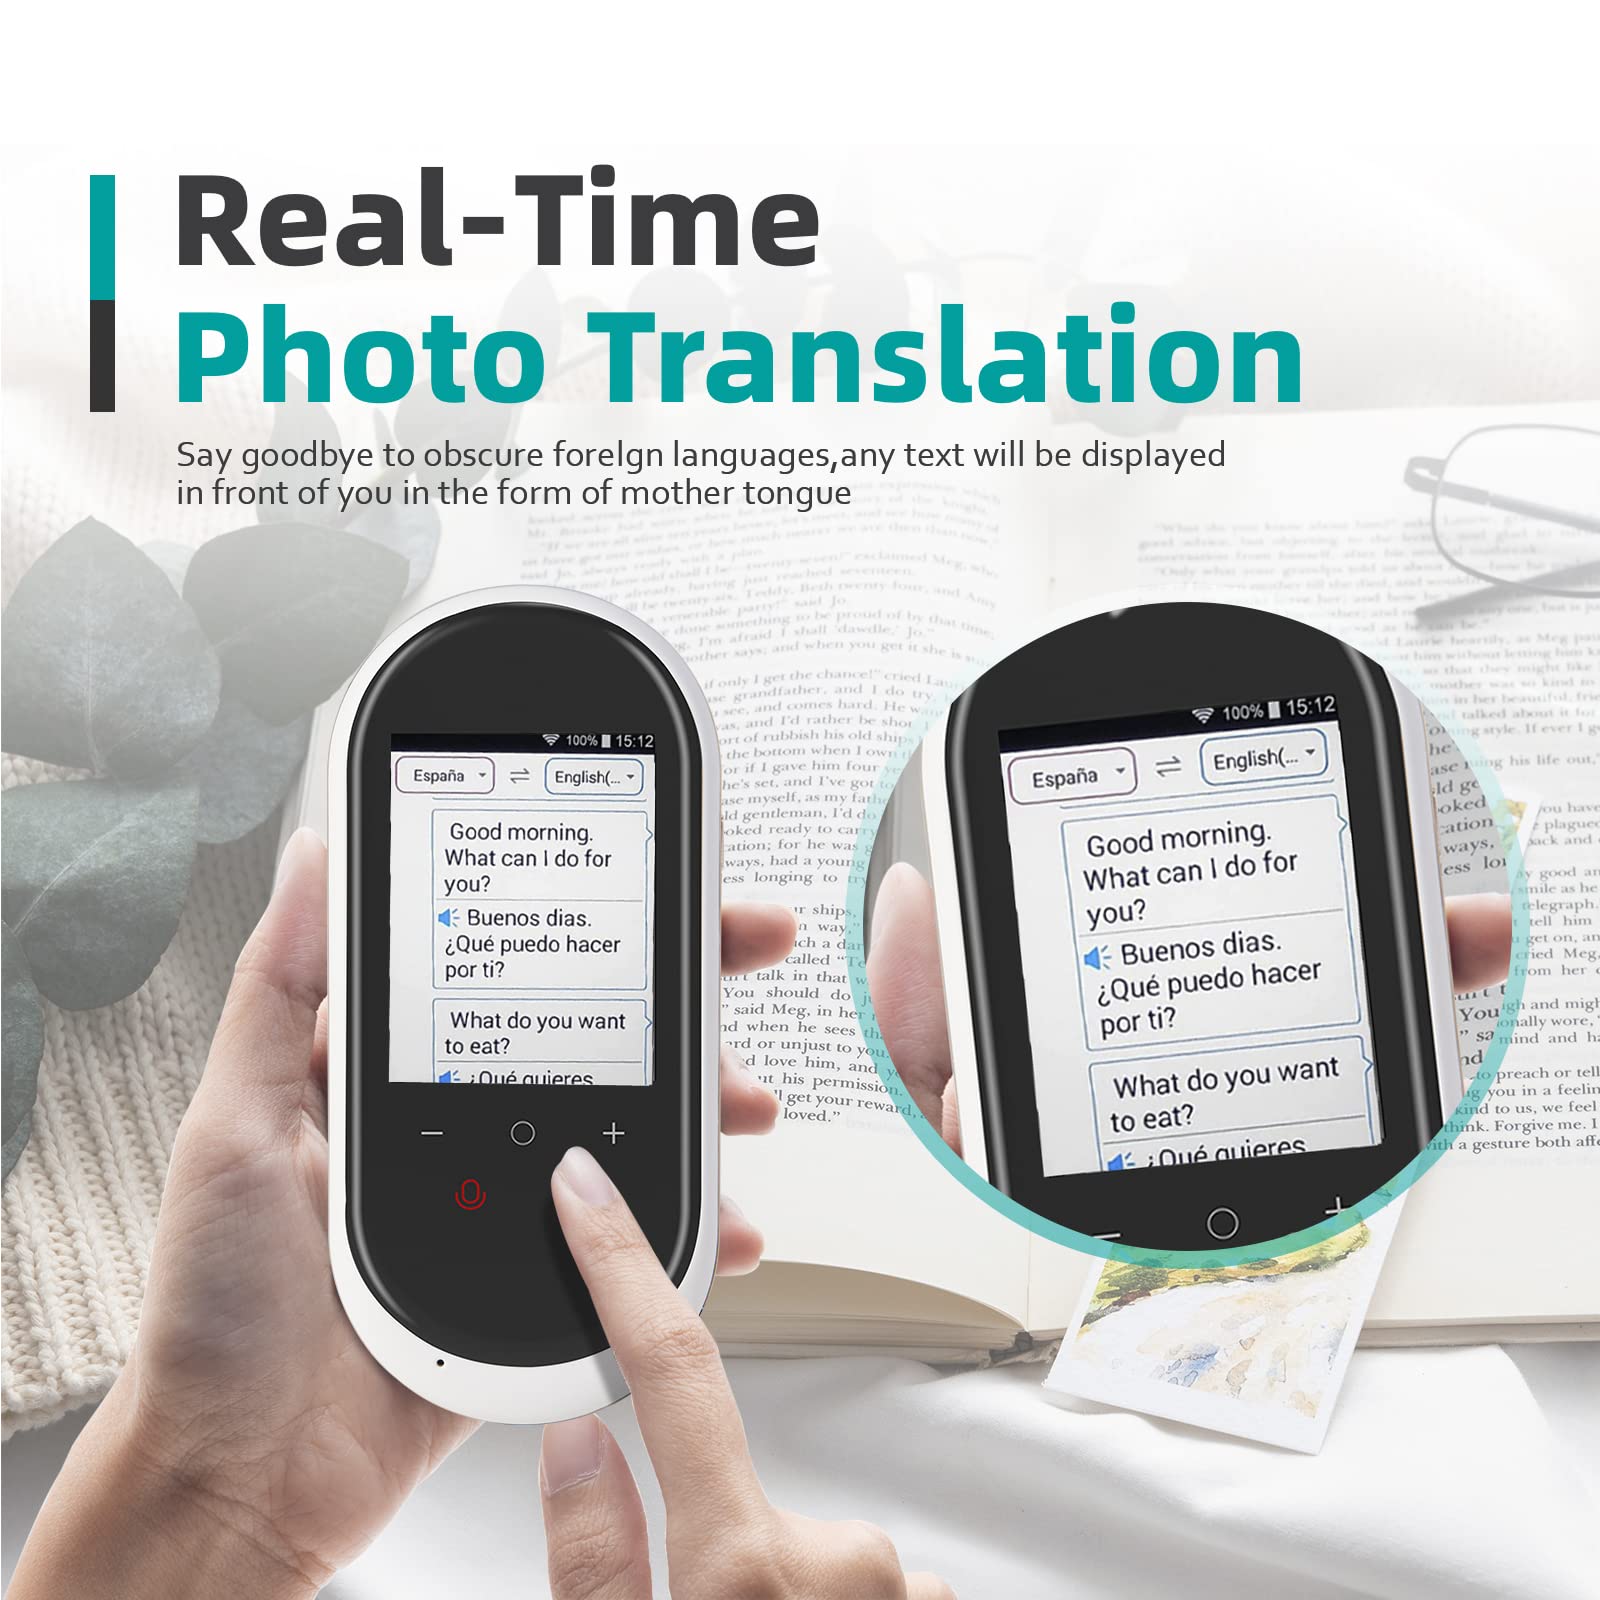 Language Translator Device Two-Way Instant Translator Device 106 Languages Support Voice & Text & Offline & Photo Translation High Accuracy Voice Translator Device for Travel Learning Business